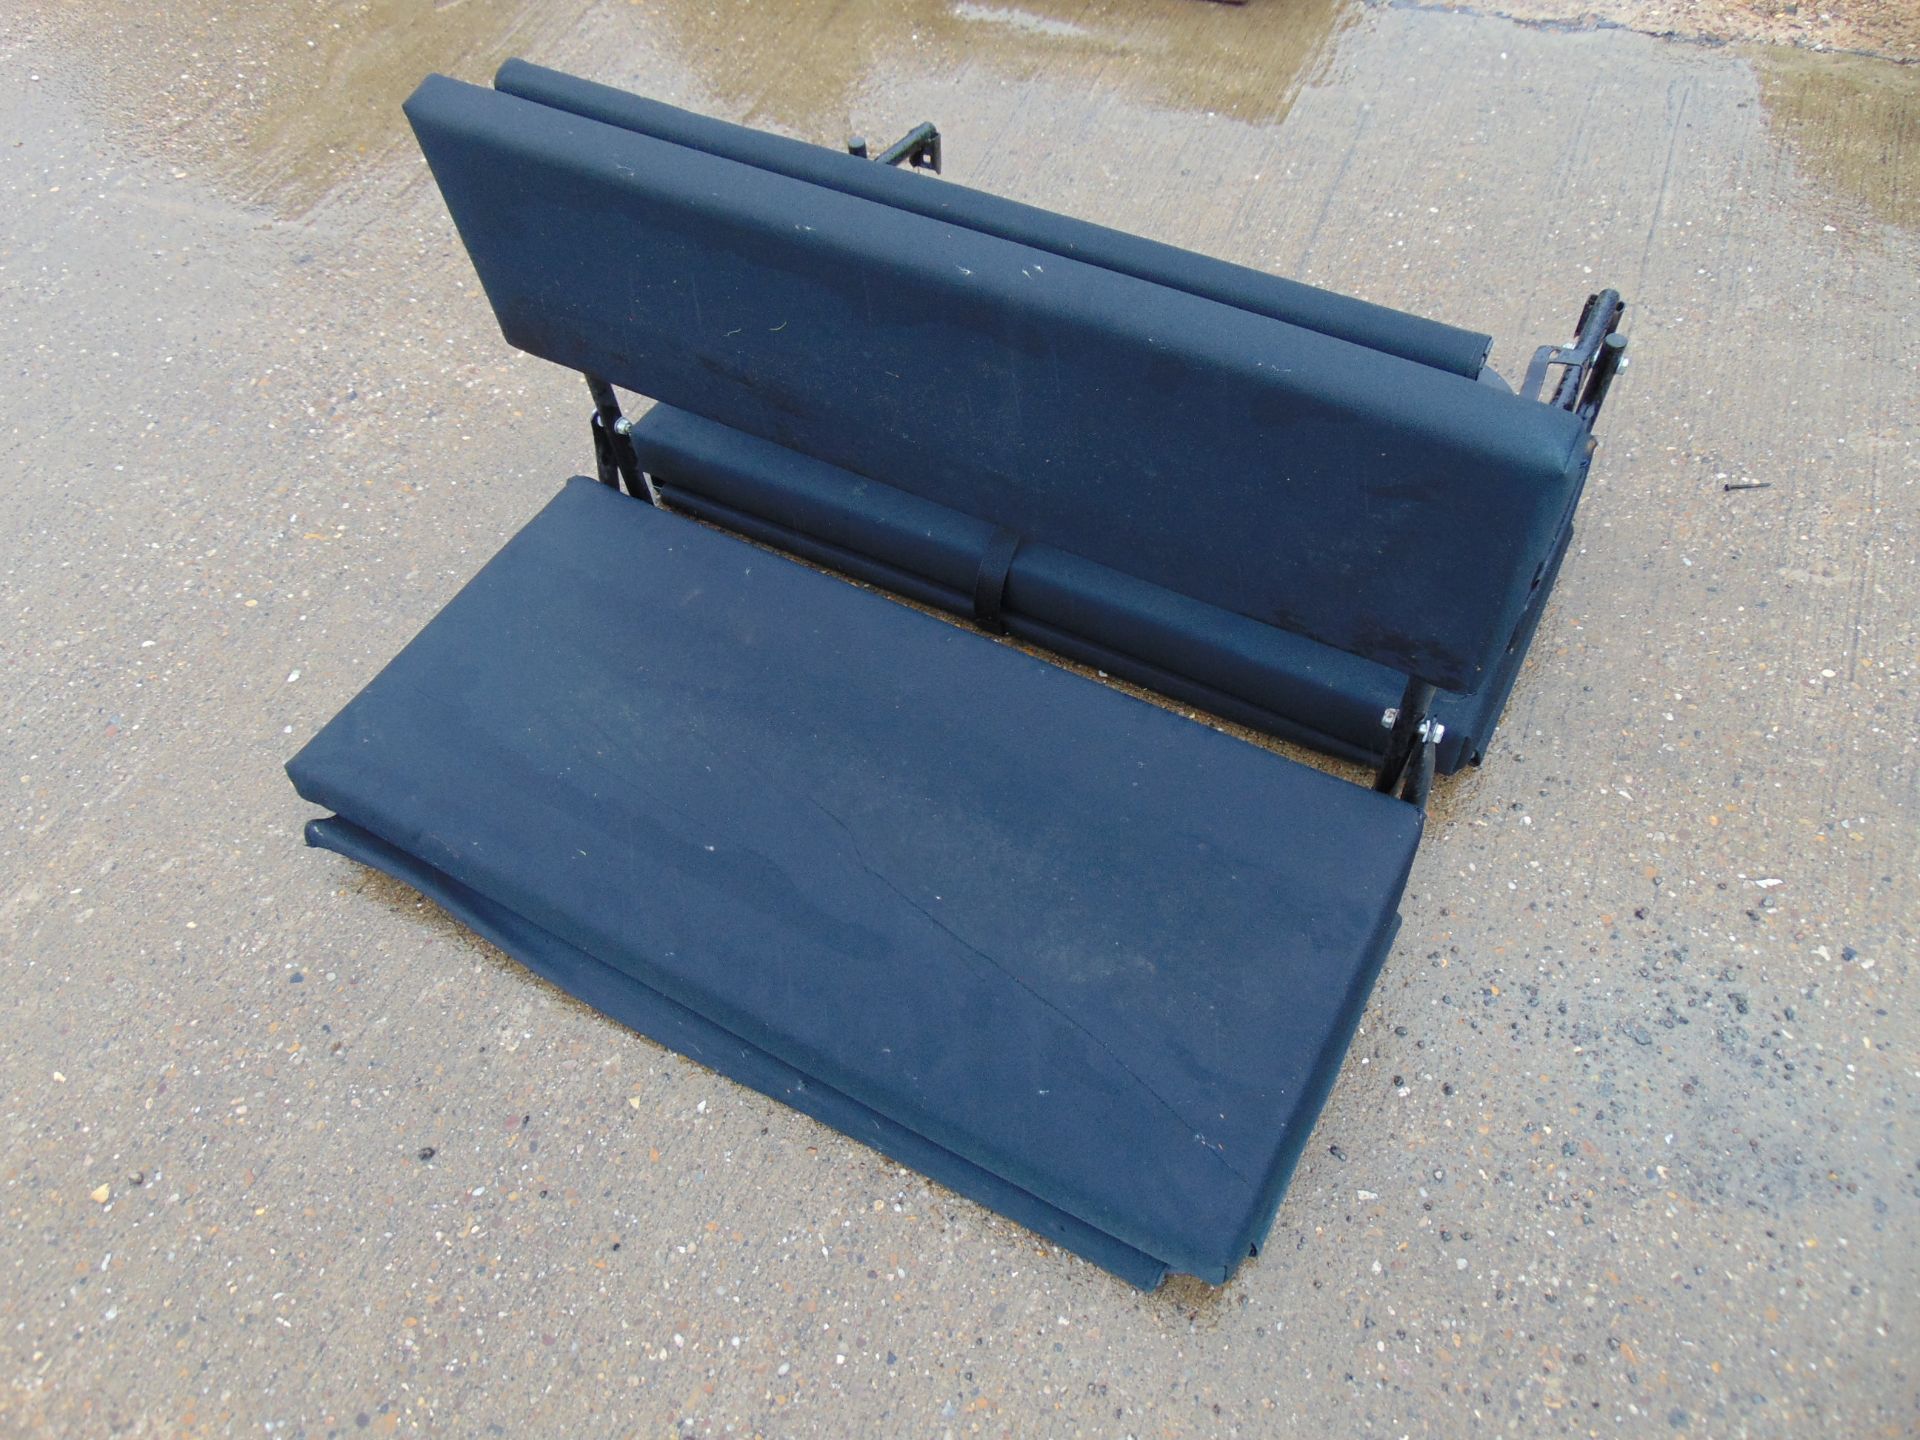 2 x Exmoor Trim Land Rover Defender Fold Down Rear Bench Seats as shown